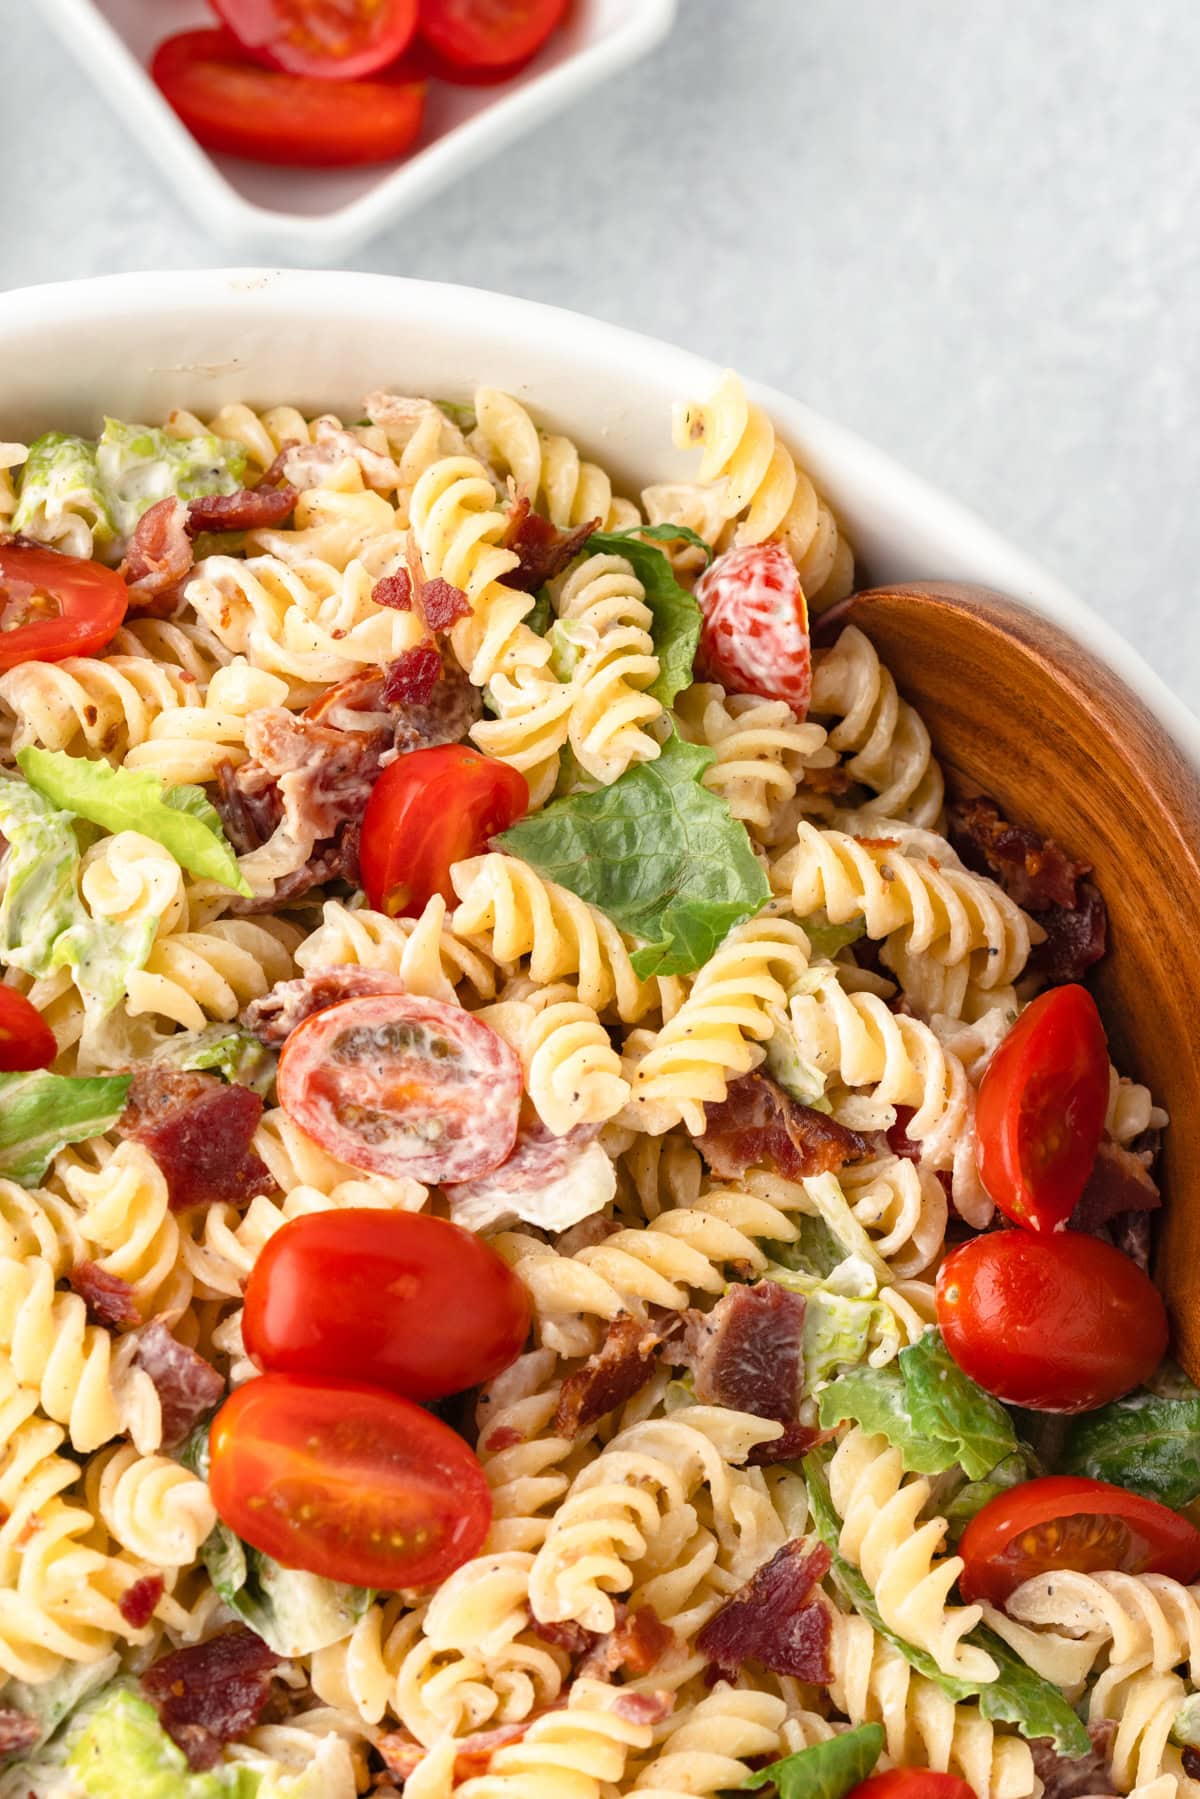 A large white bowl containing a blt pasta salad with large wooden spoons. It has bacon, romaine lettuce and grape tomatoes.